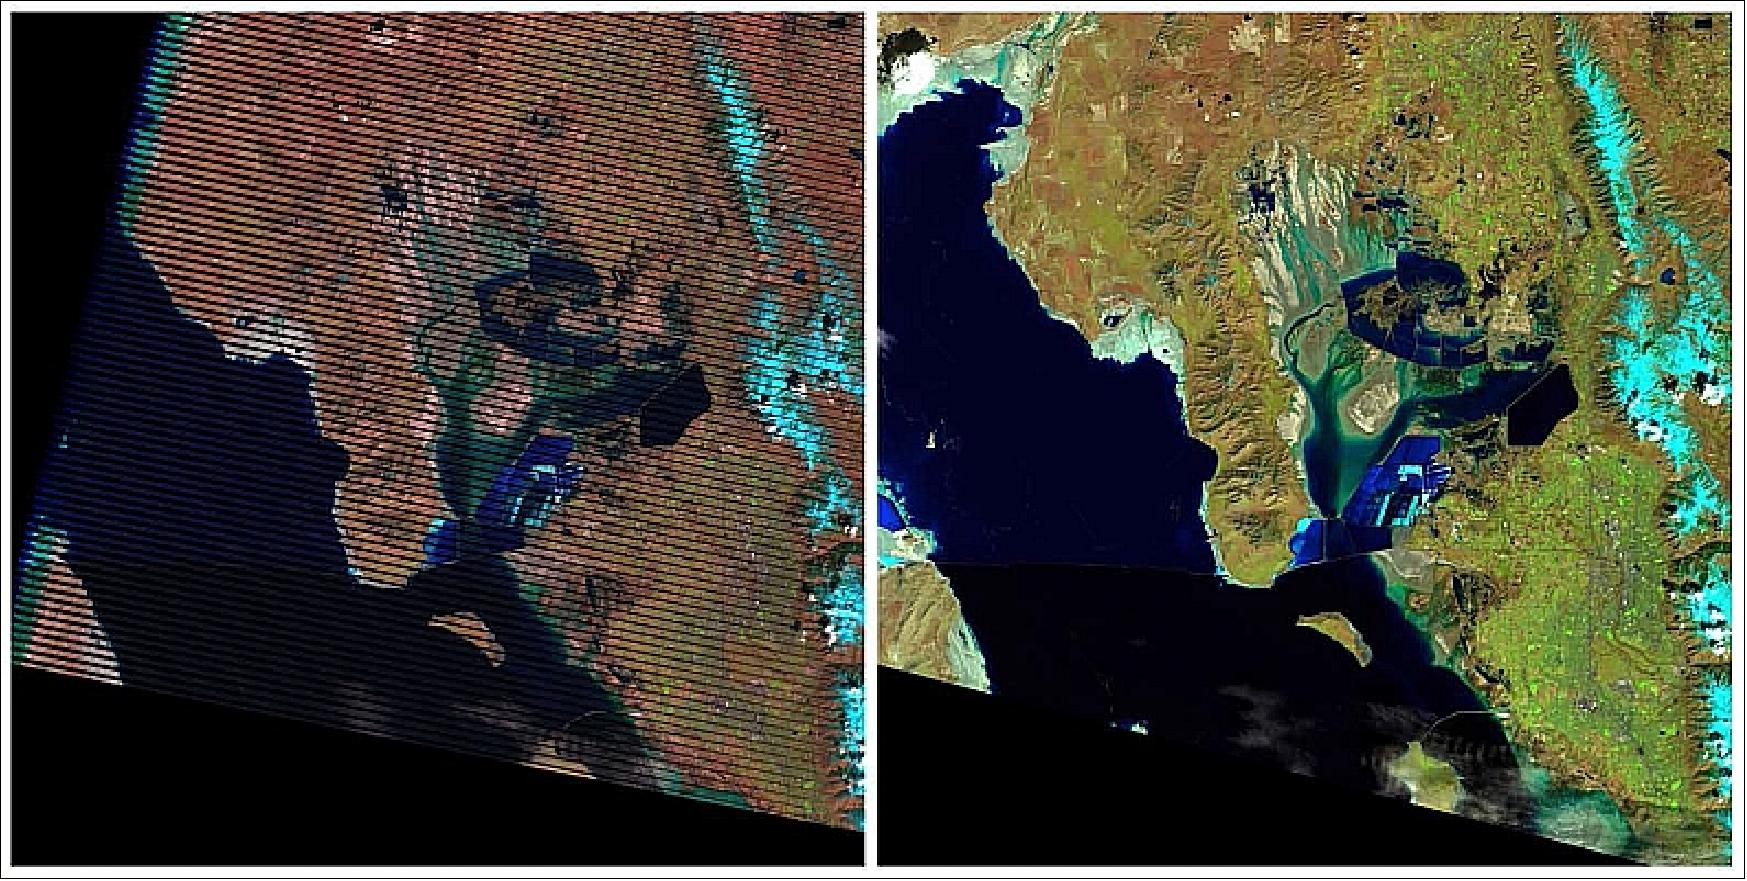 Figure 98: These images show a portion of the Great Salt Lake, Utah as seen by LS-7 (left) and LS-8 (LDCM) satellites (right); both images were acquired on March 29, 2013 (image credit: USGS, Ref. 80)